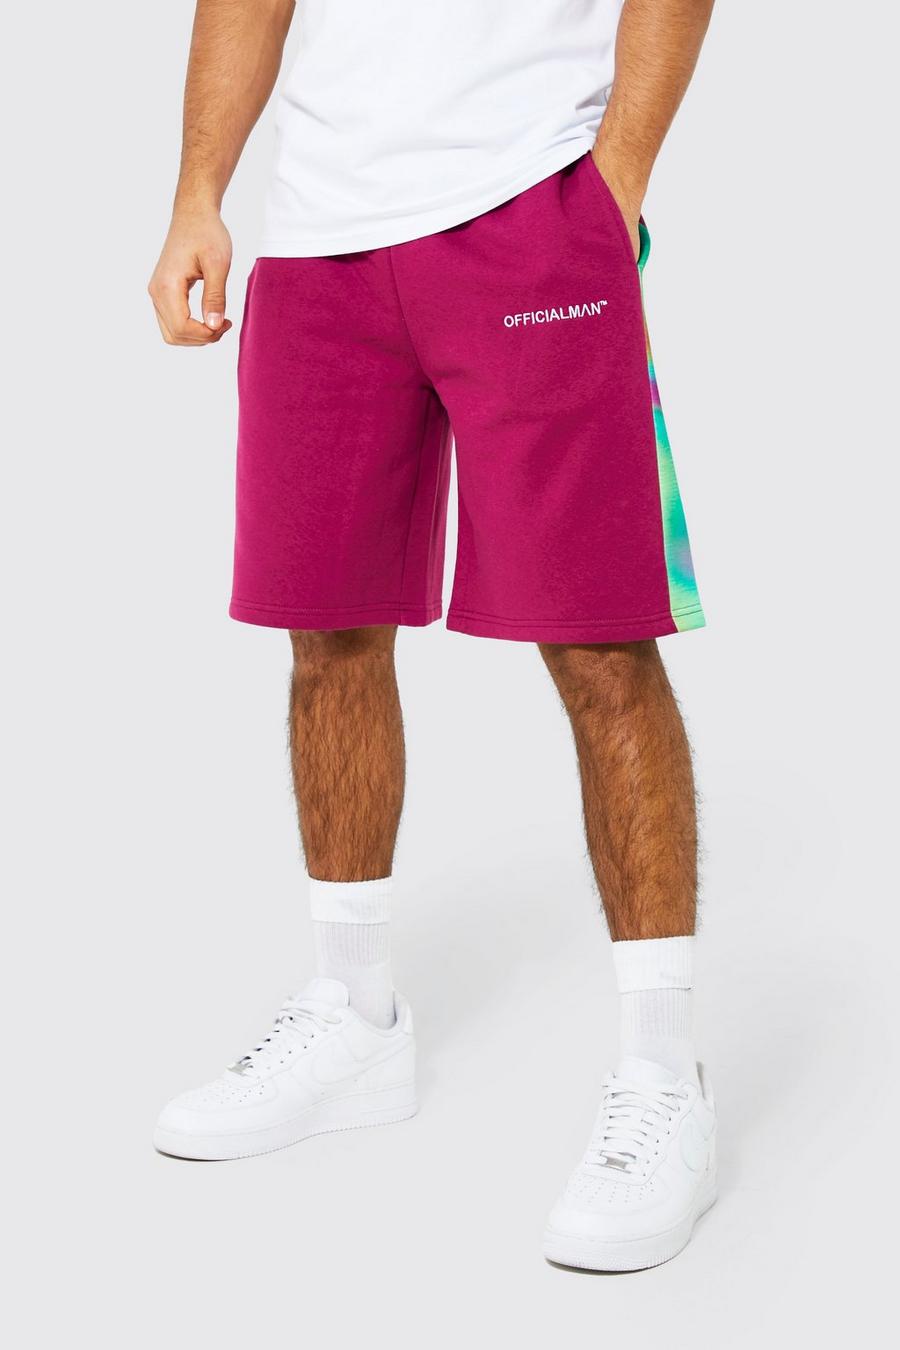 Purple lila Oversized Official Man Print Panel Shorts image number 1